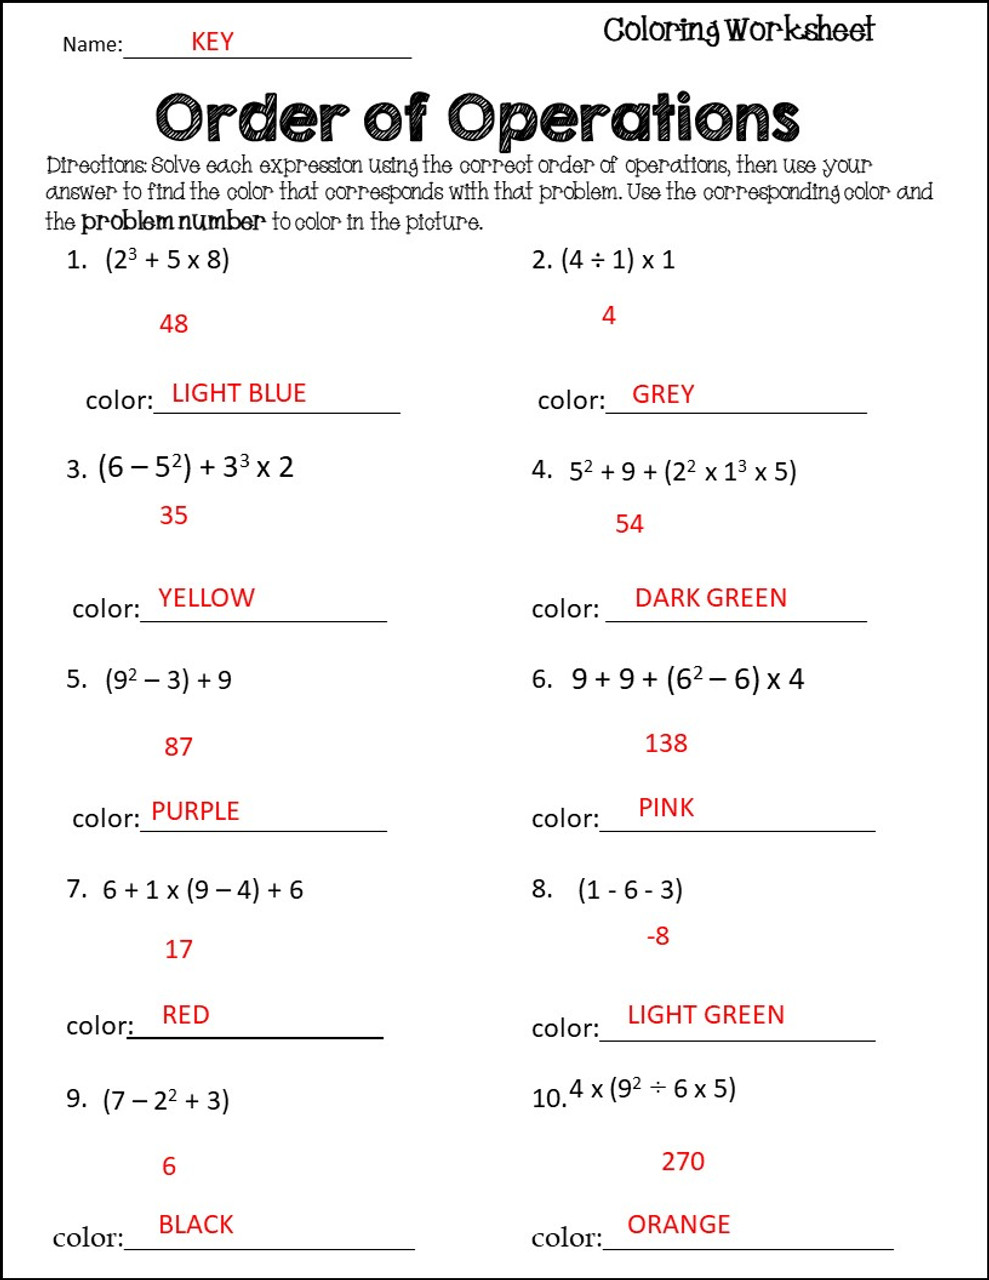 St. Patrick's Day Order of Operations Coloring Activity